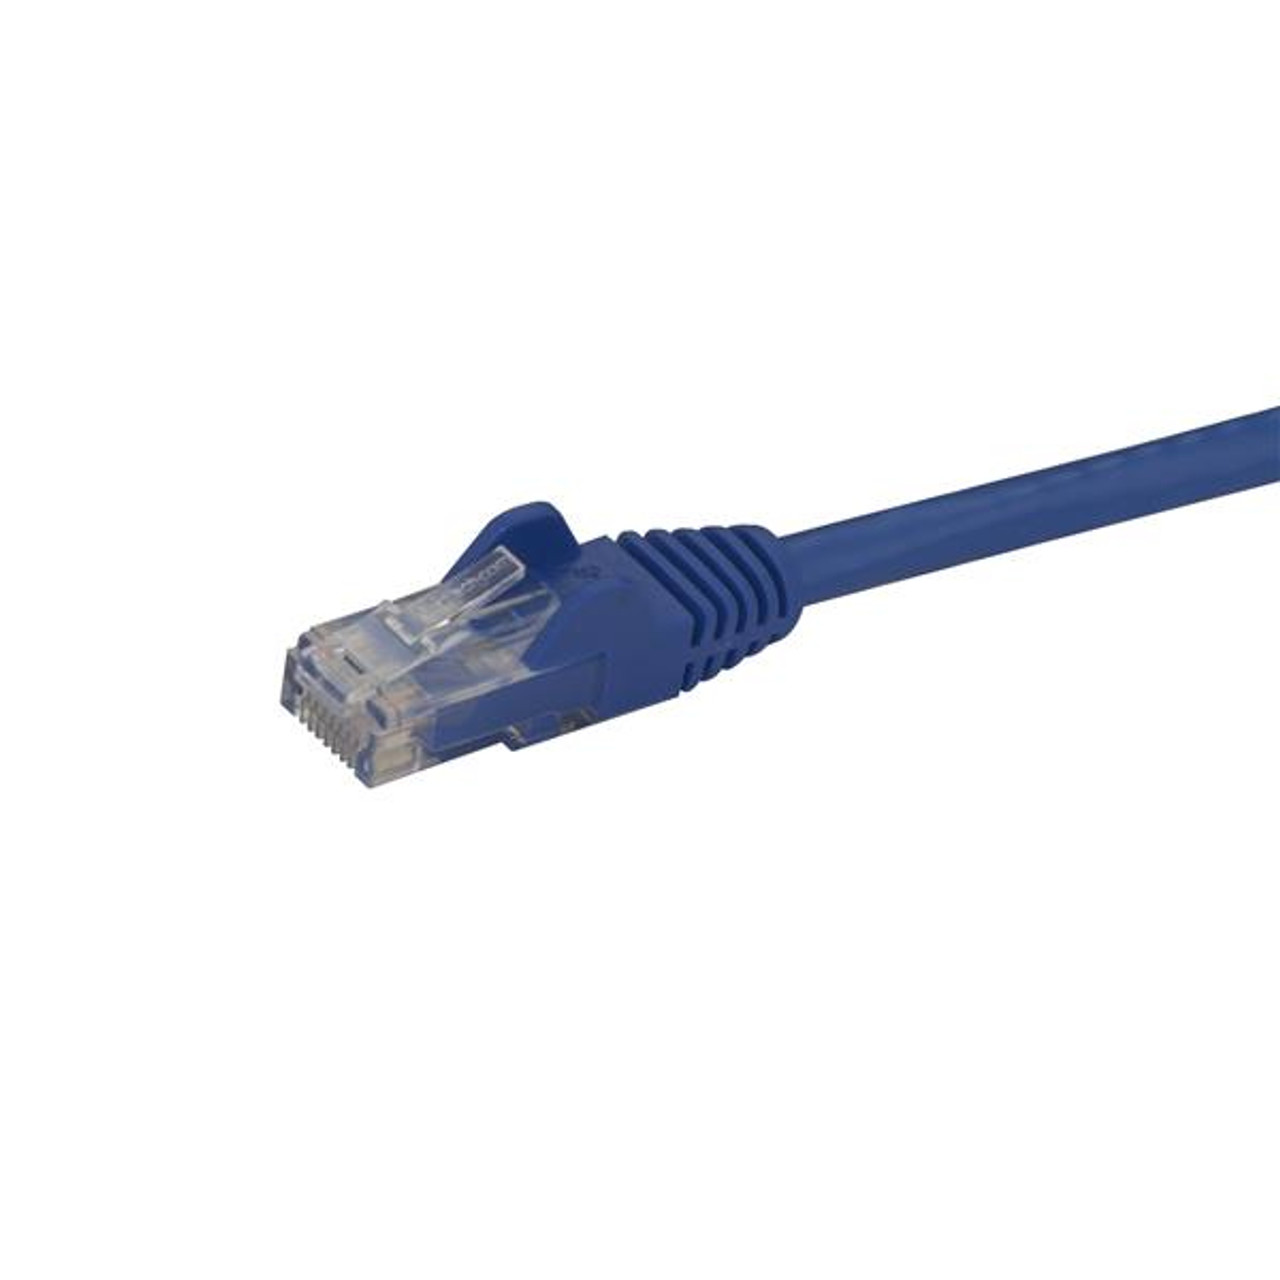 StarTech.com 1.5m CAT6 Ethernet Cable - Blue CAT 6 Gigabit Ethernet Wire -650MHz 100W PoE RJ45 UTP Network/Patch Cord Snagless w/Strain Relief Fluke Tested/Wiring is UL Certified/TIA